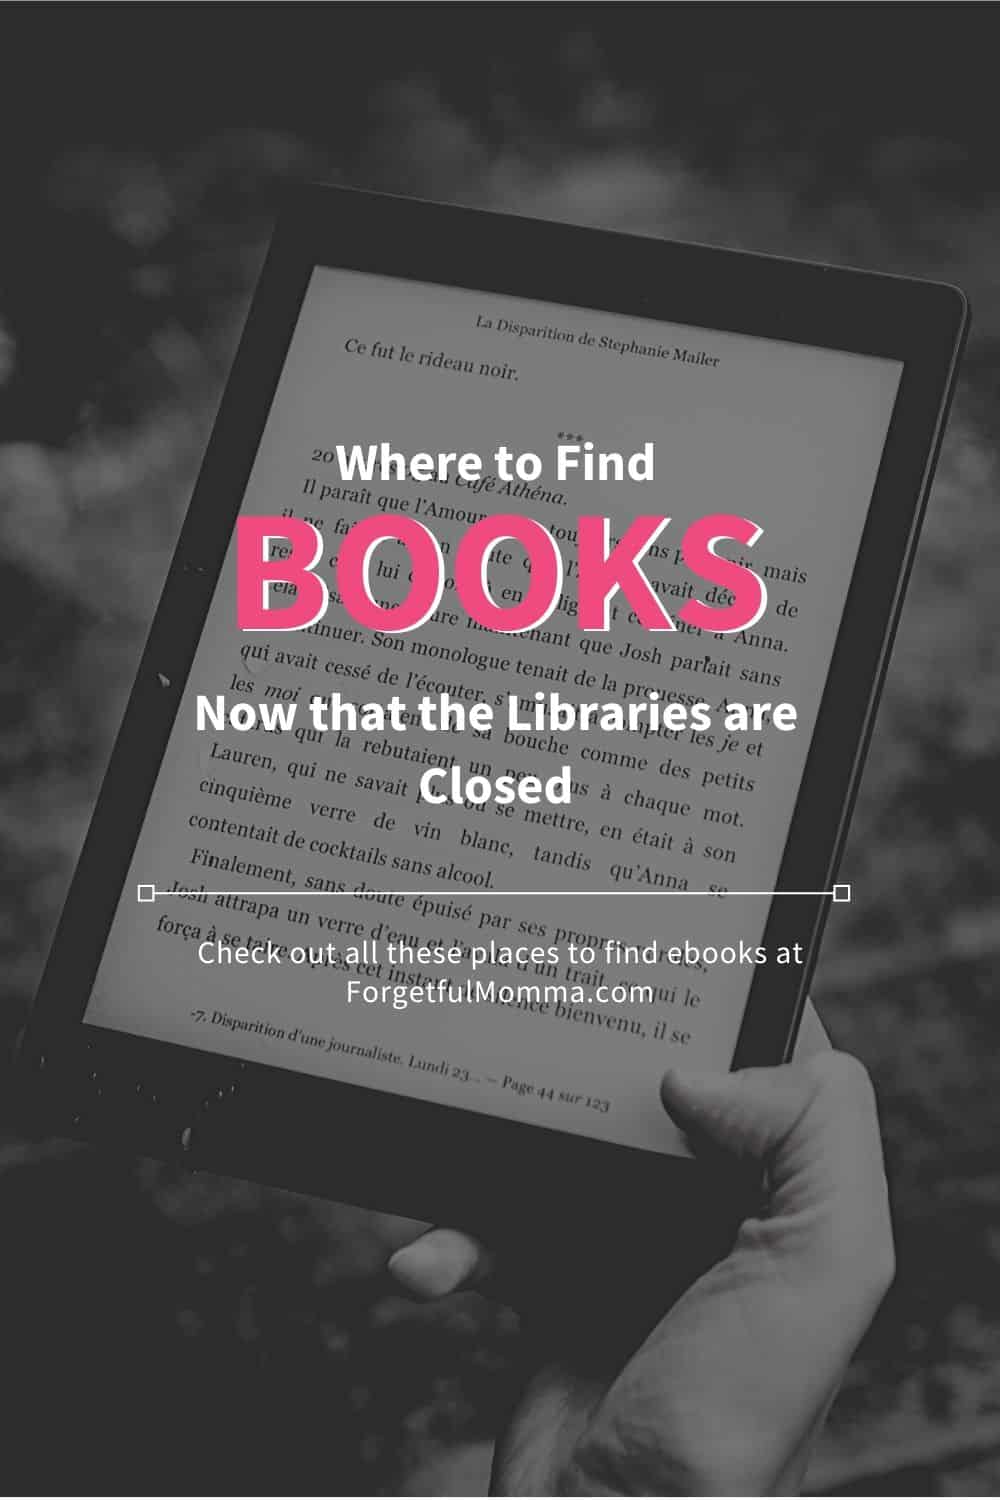 Where to Find Books Online With Libraries Closed